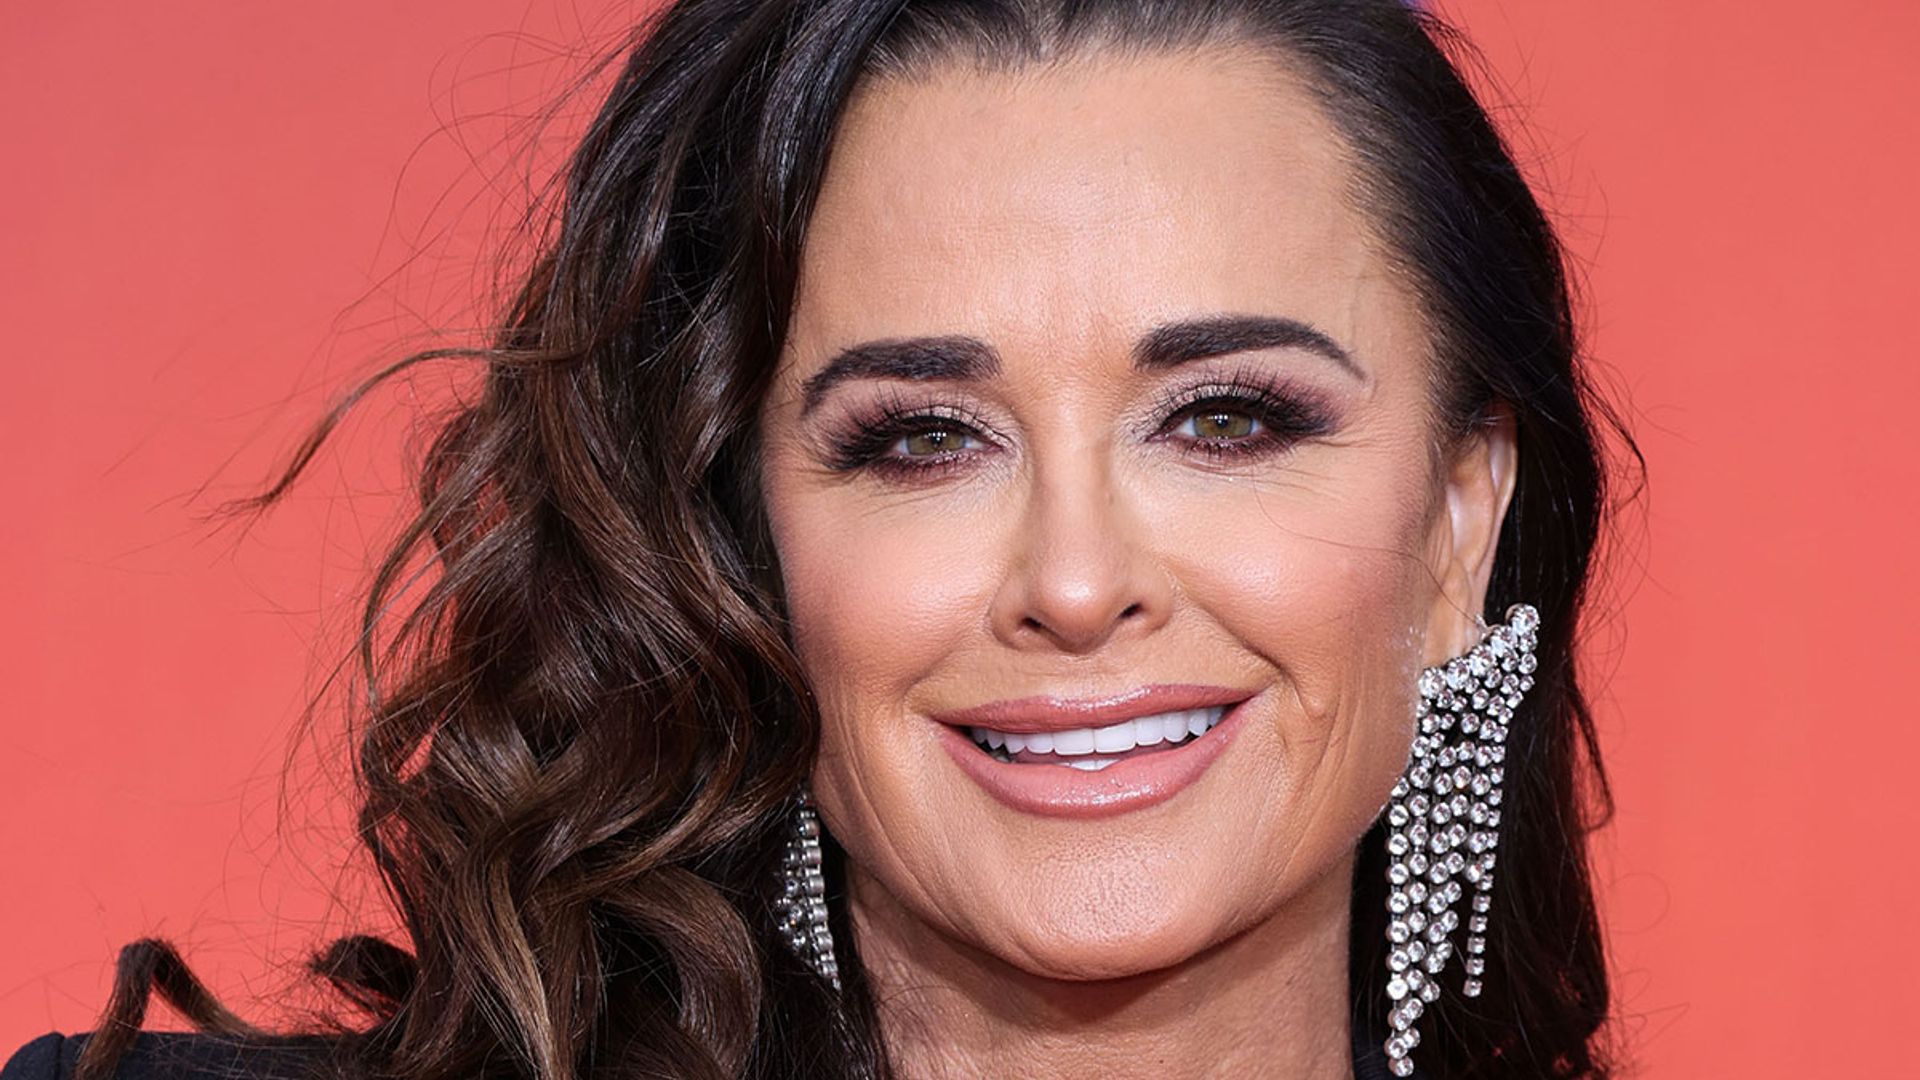 Kyle Richards on RHOBH drama, worst show moments & her royal style icon